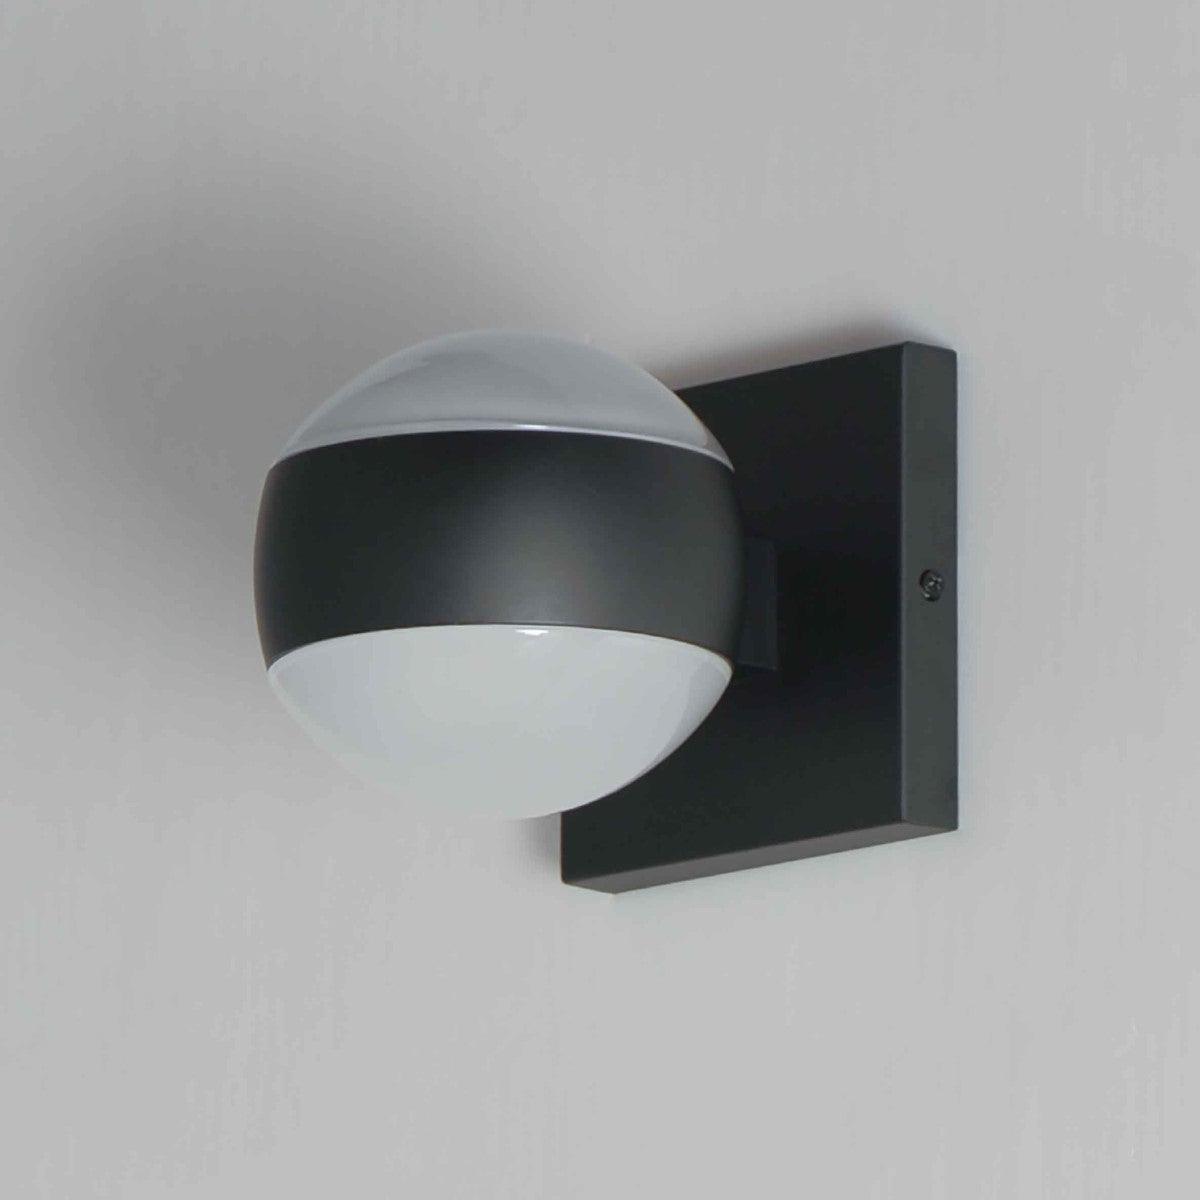 Modular 5 in. Globe LED Outdoor Wall Sconce 3000K Black Finish